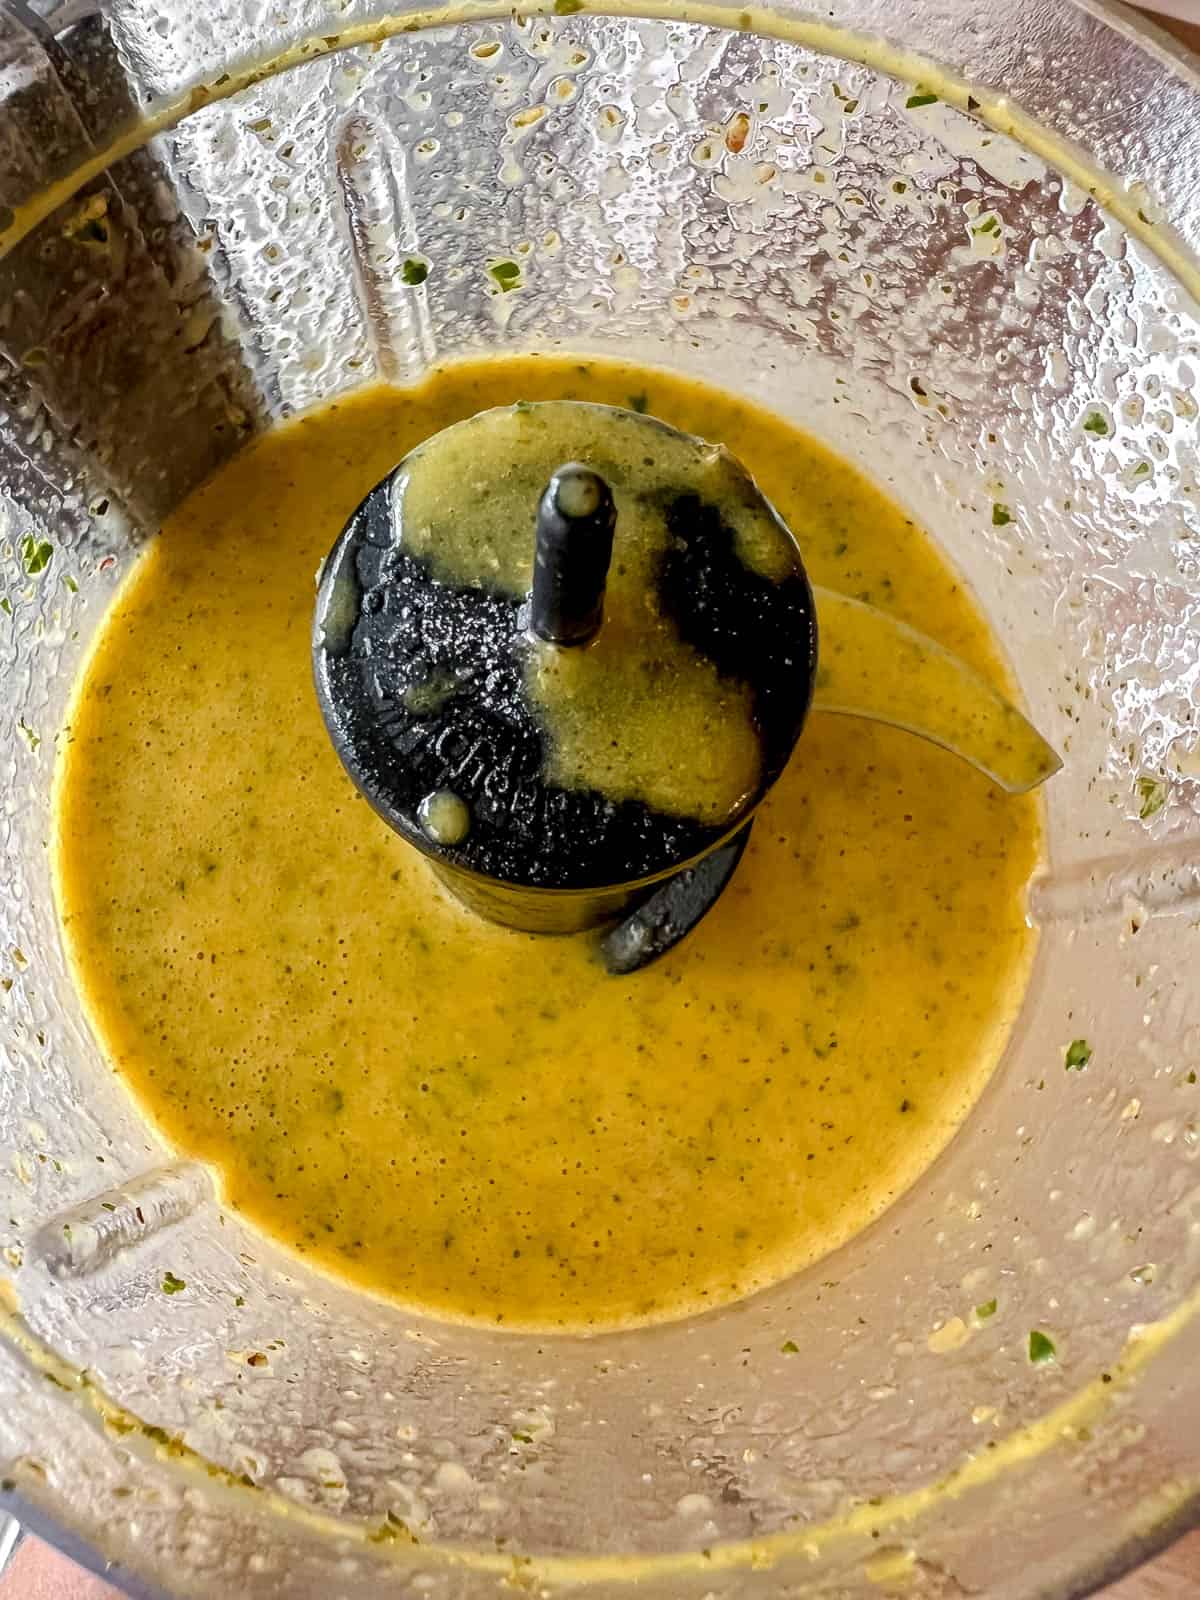 Salad dressing with turmeric all mixed together in food processor.